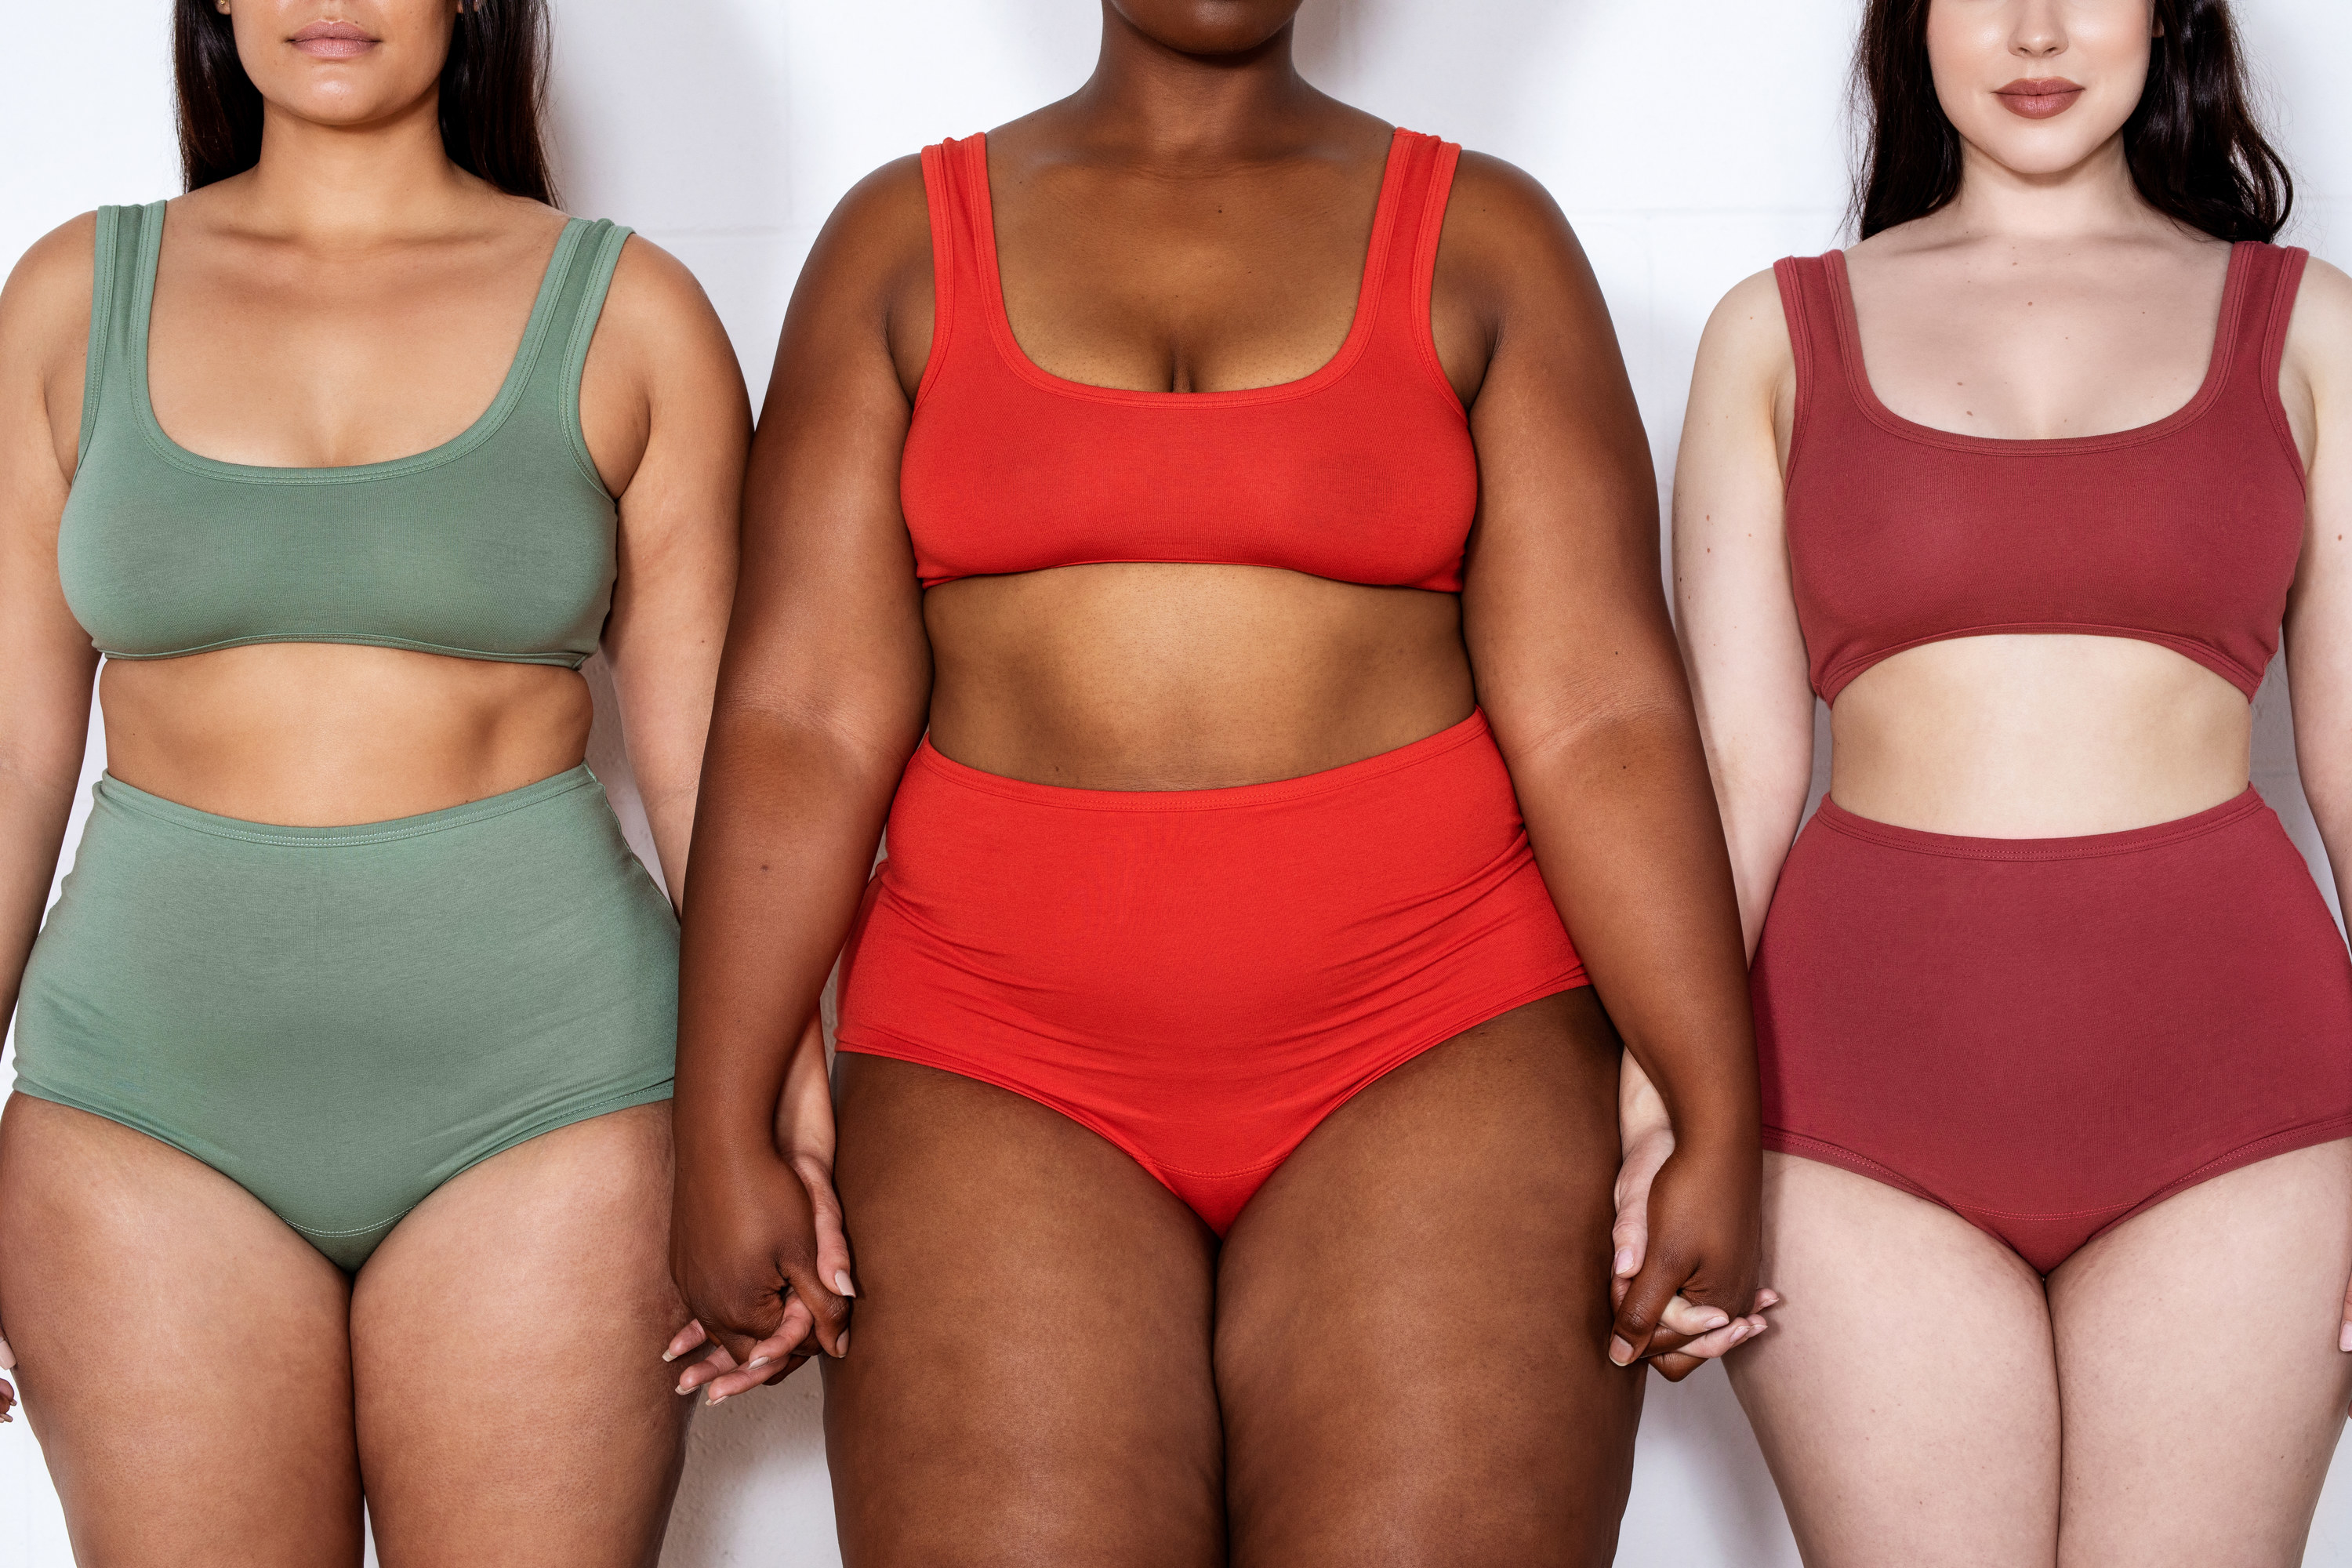 An image of three different women with different skin colors and body types